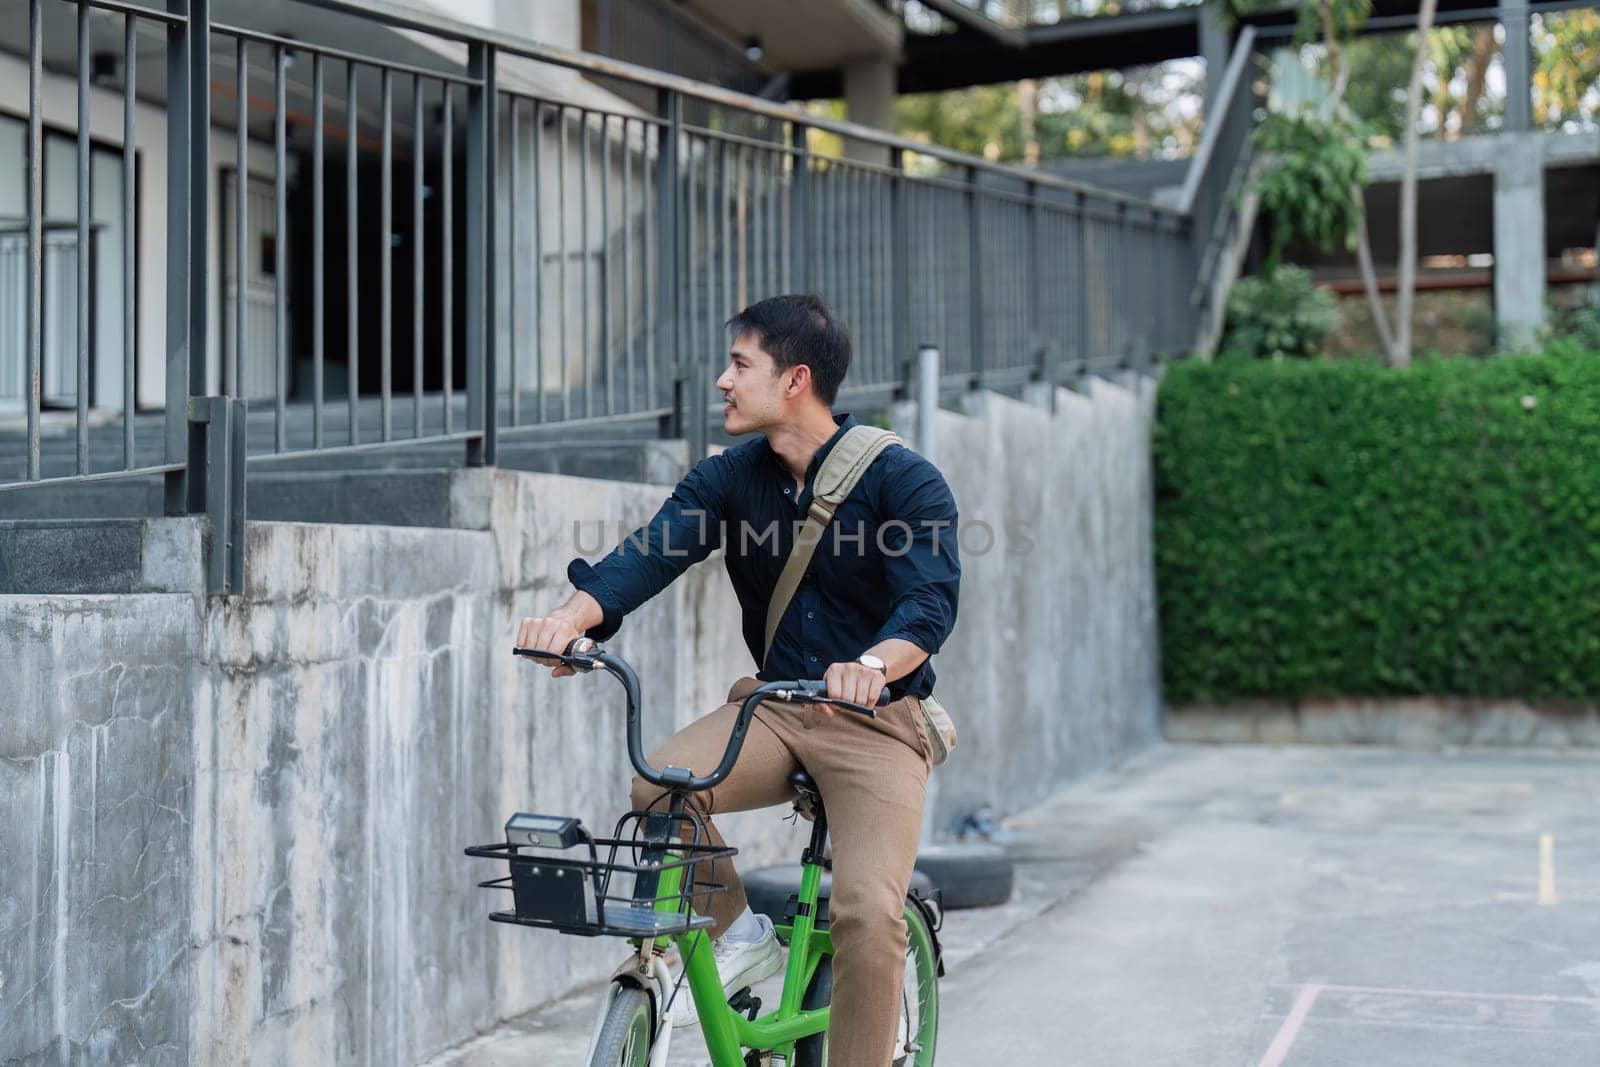 A man in a suit is riding a green bike with a basket. He is wearing a watch and a backpack